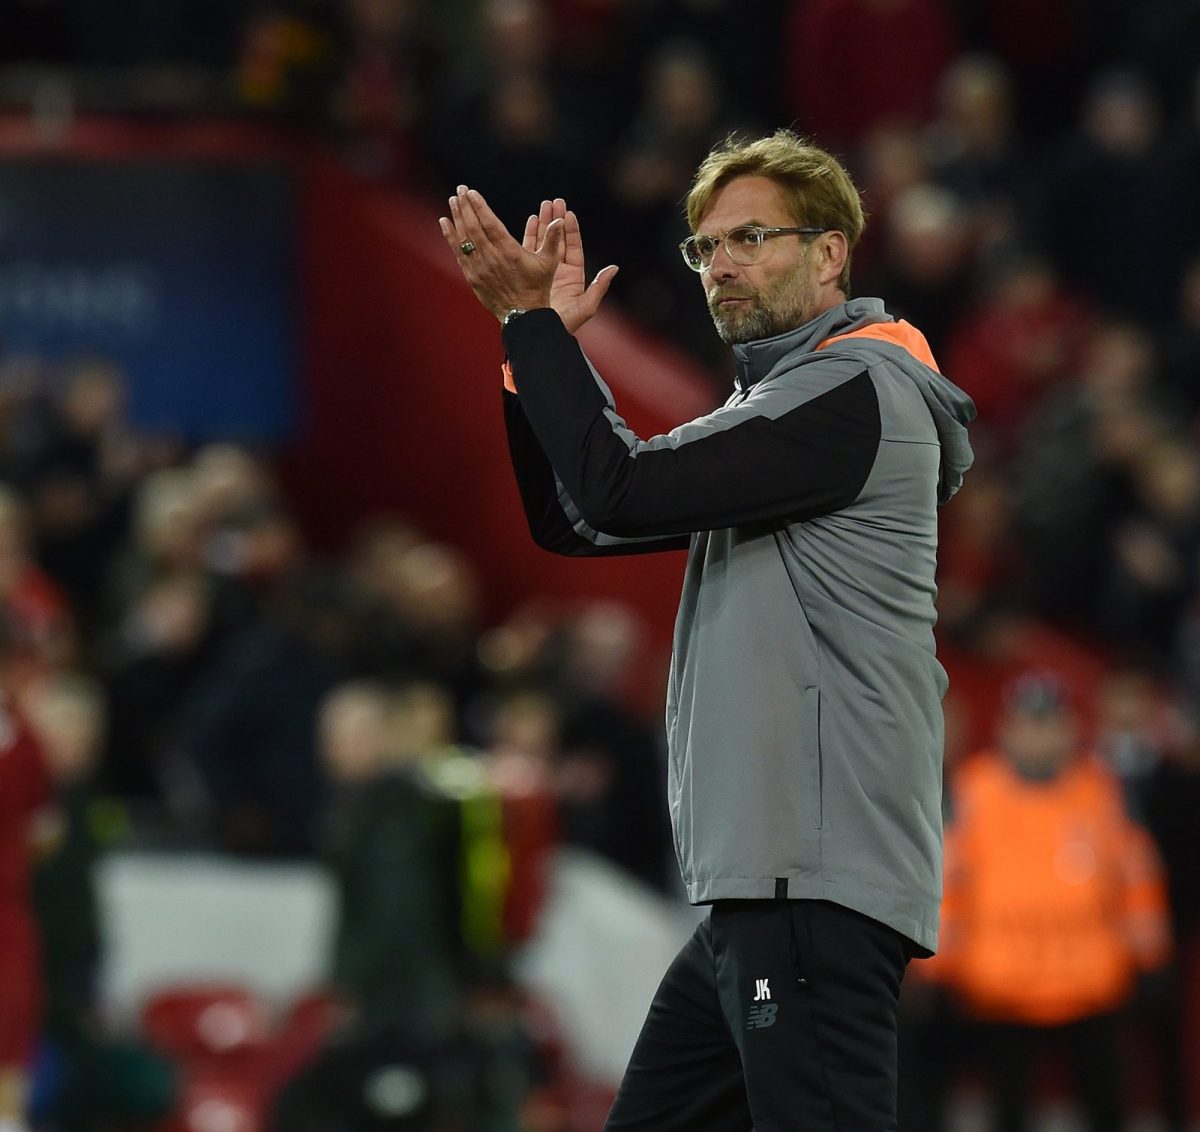 Klopp Happy To Learn From New Zealand Rugby League Team